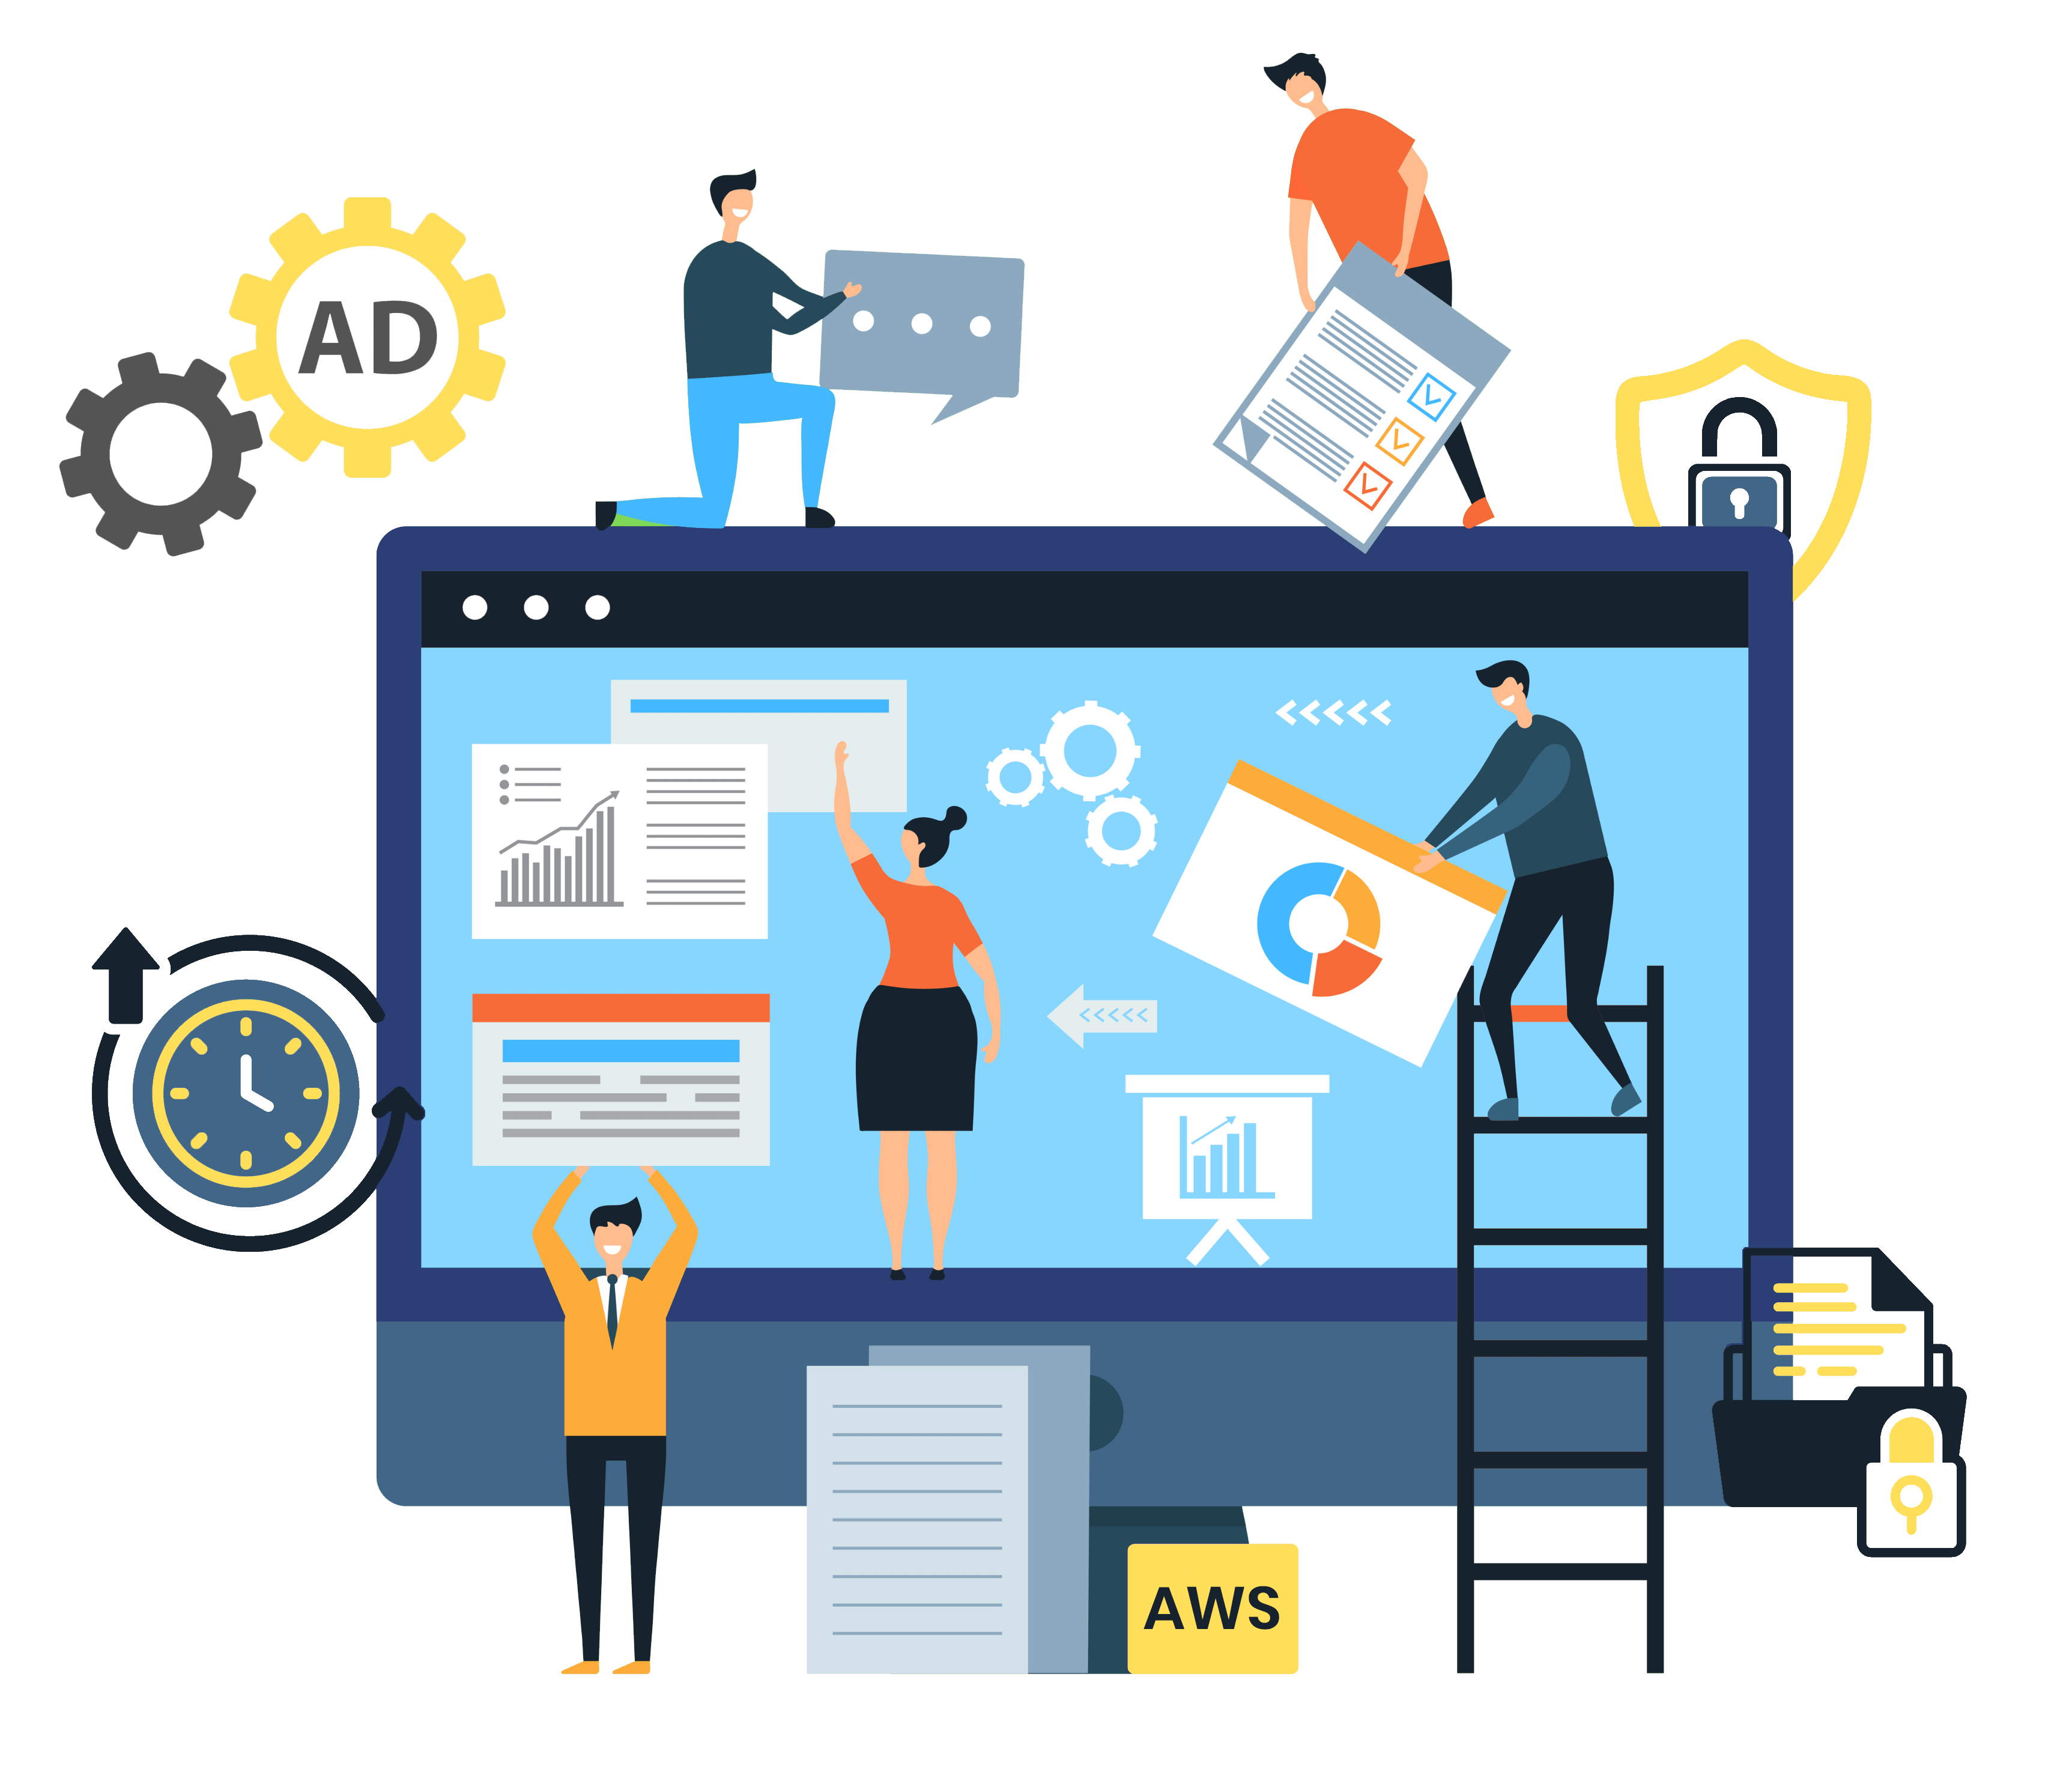 TallyPrime on AWS optimizes streaming for varying internet connectivity, ensuring responsive performance and quality.